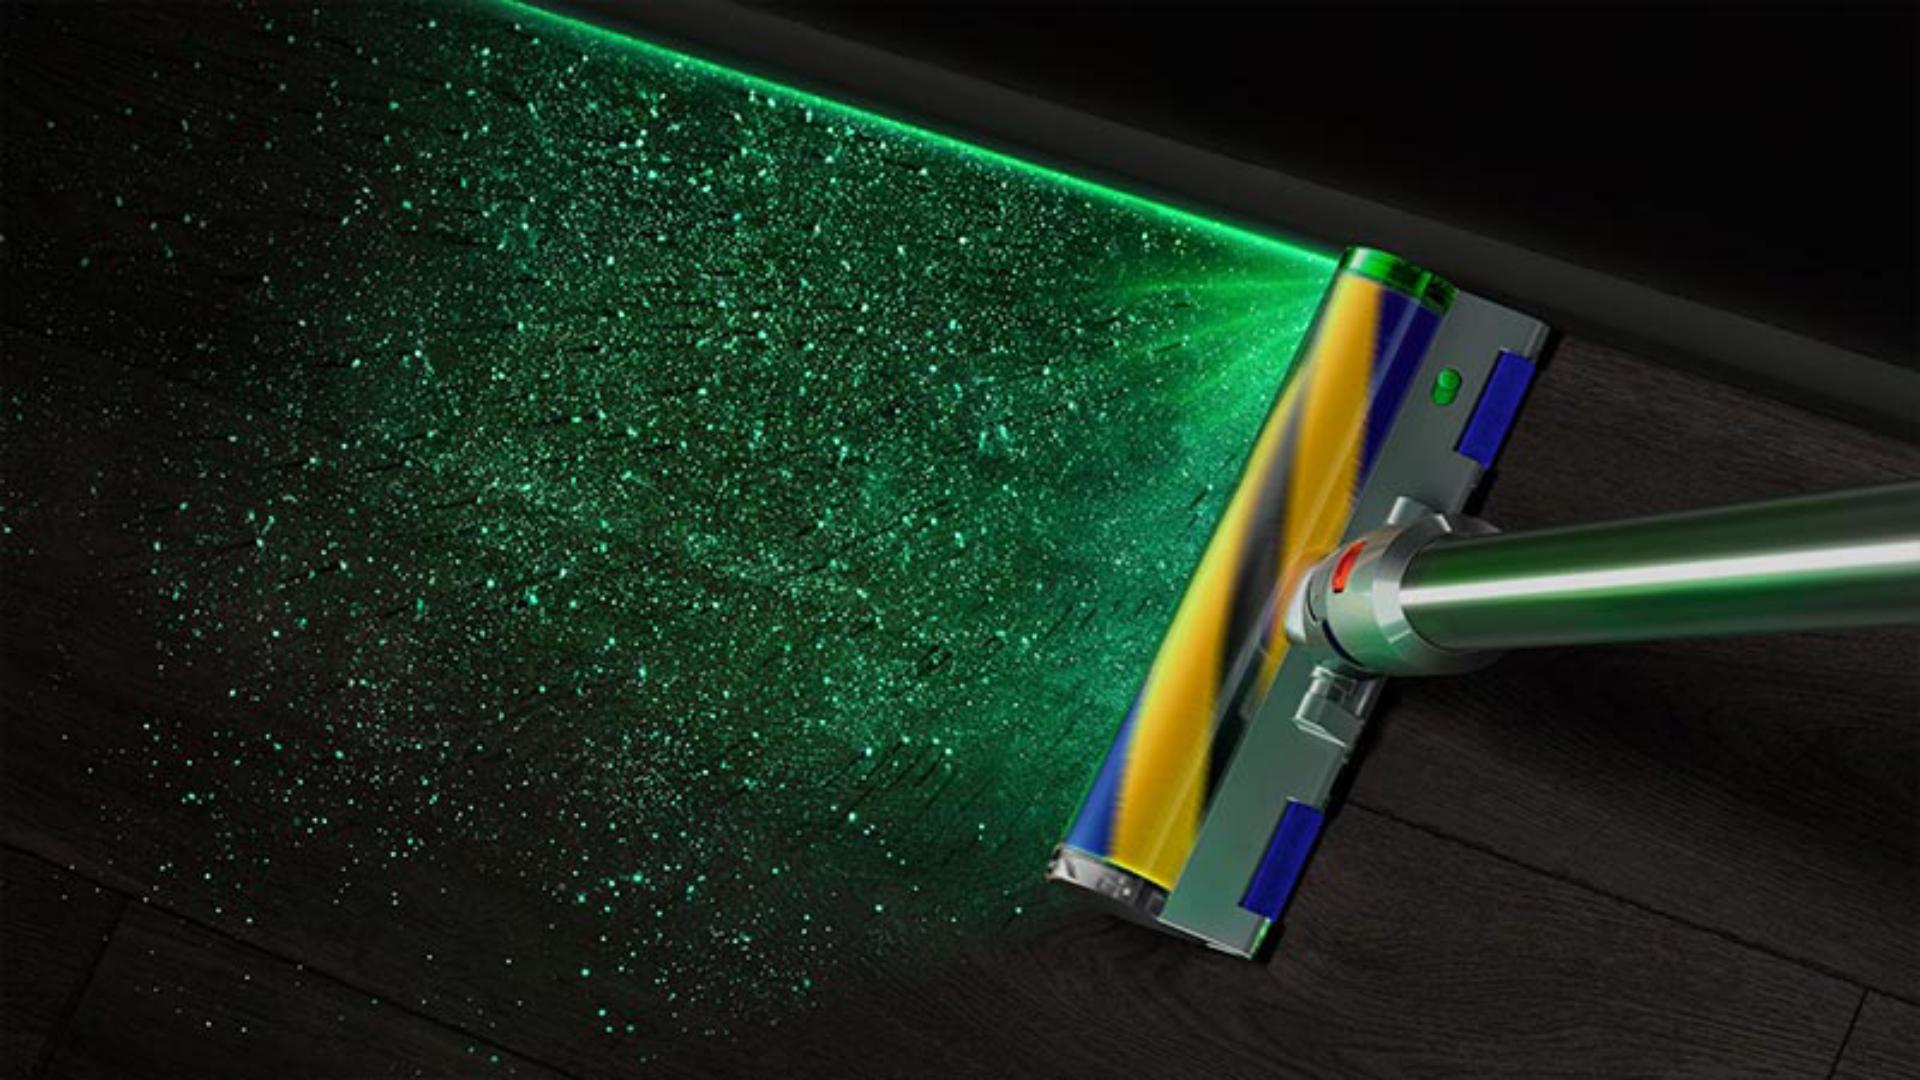 Dyson V15 Detect with green laser